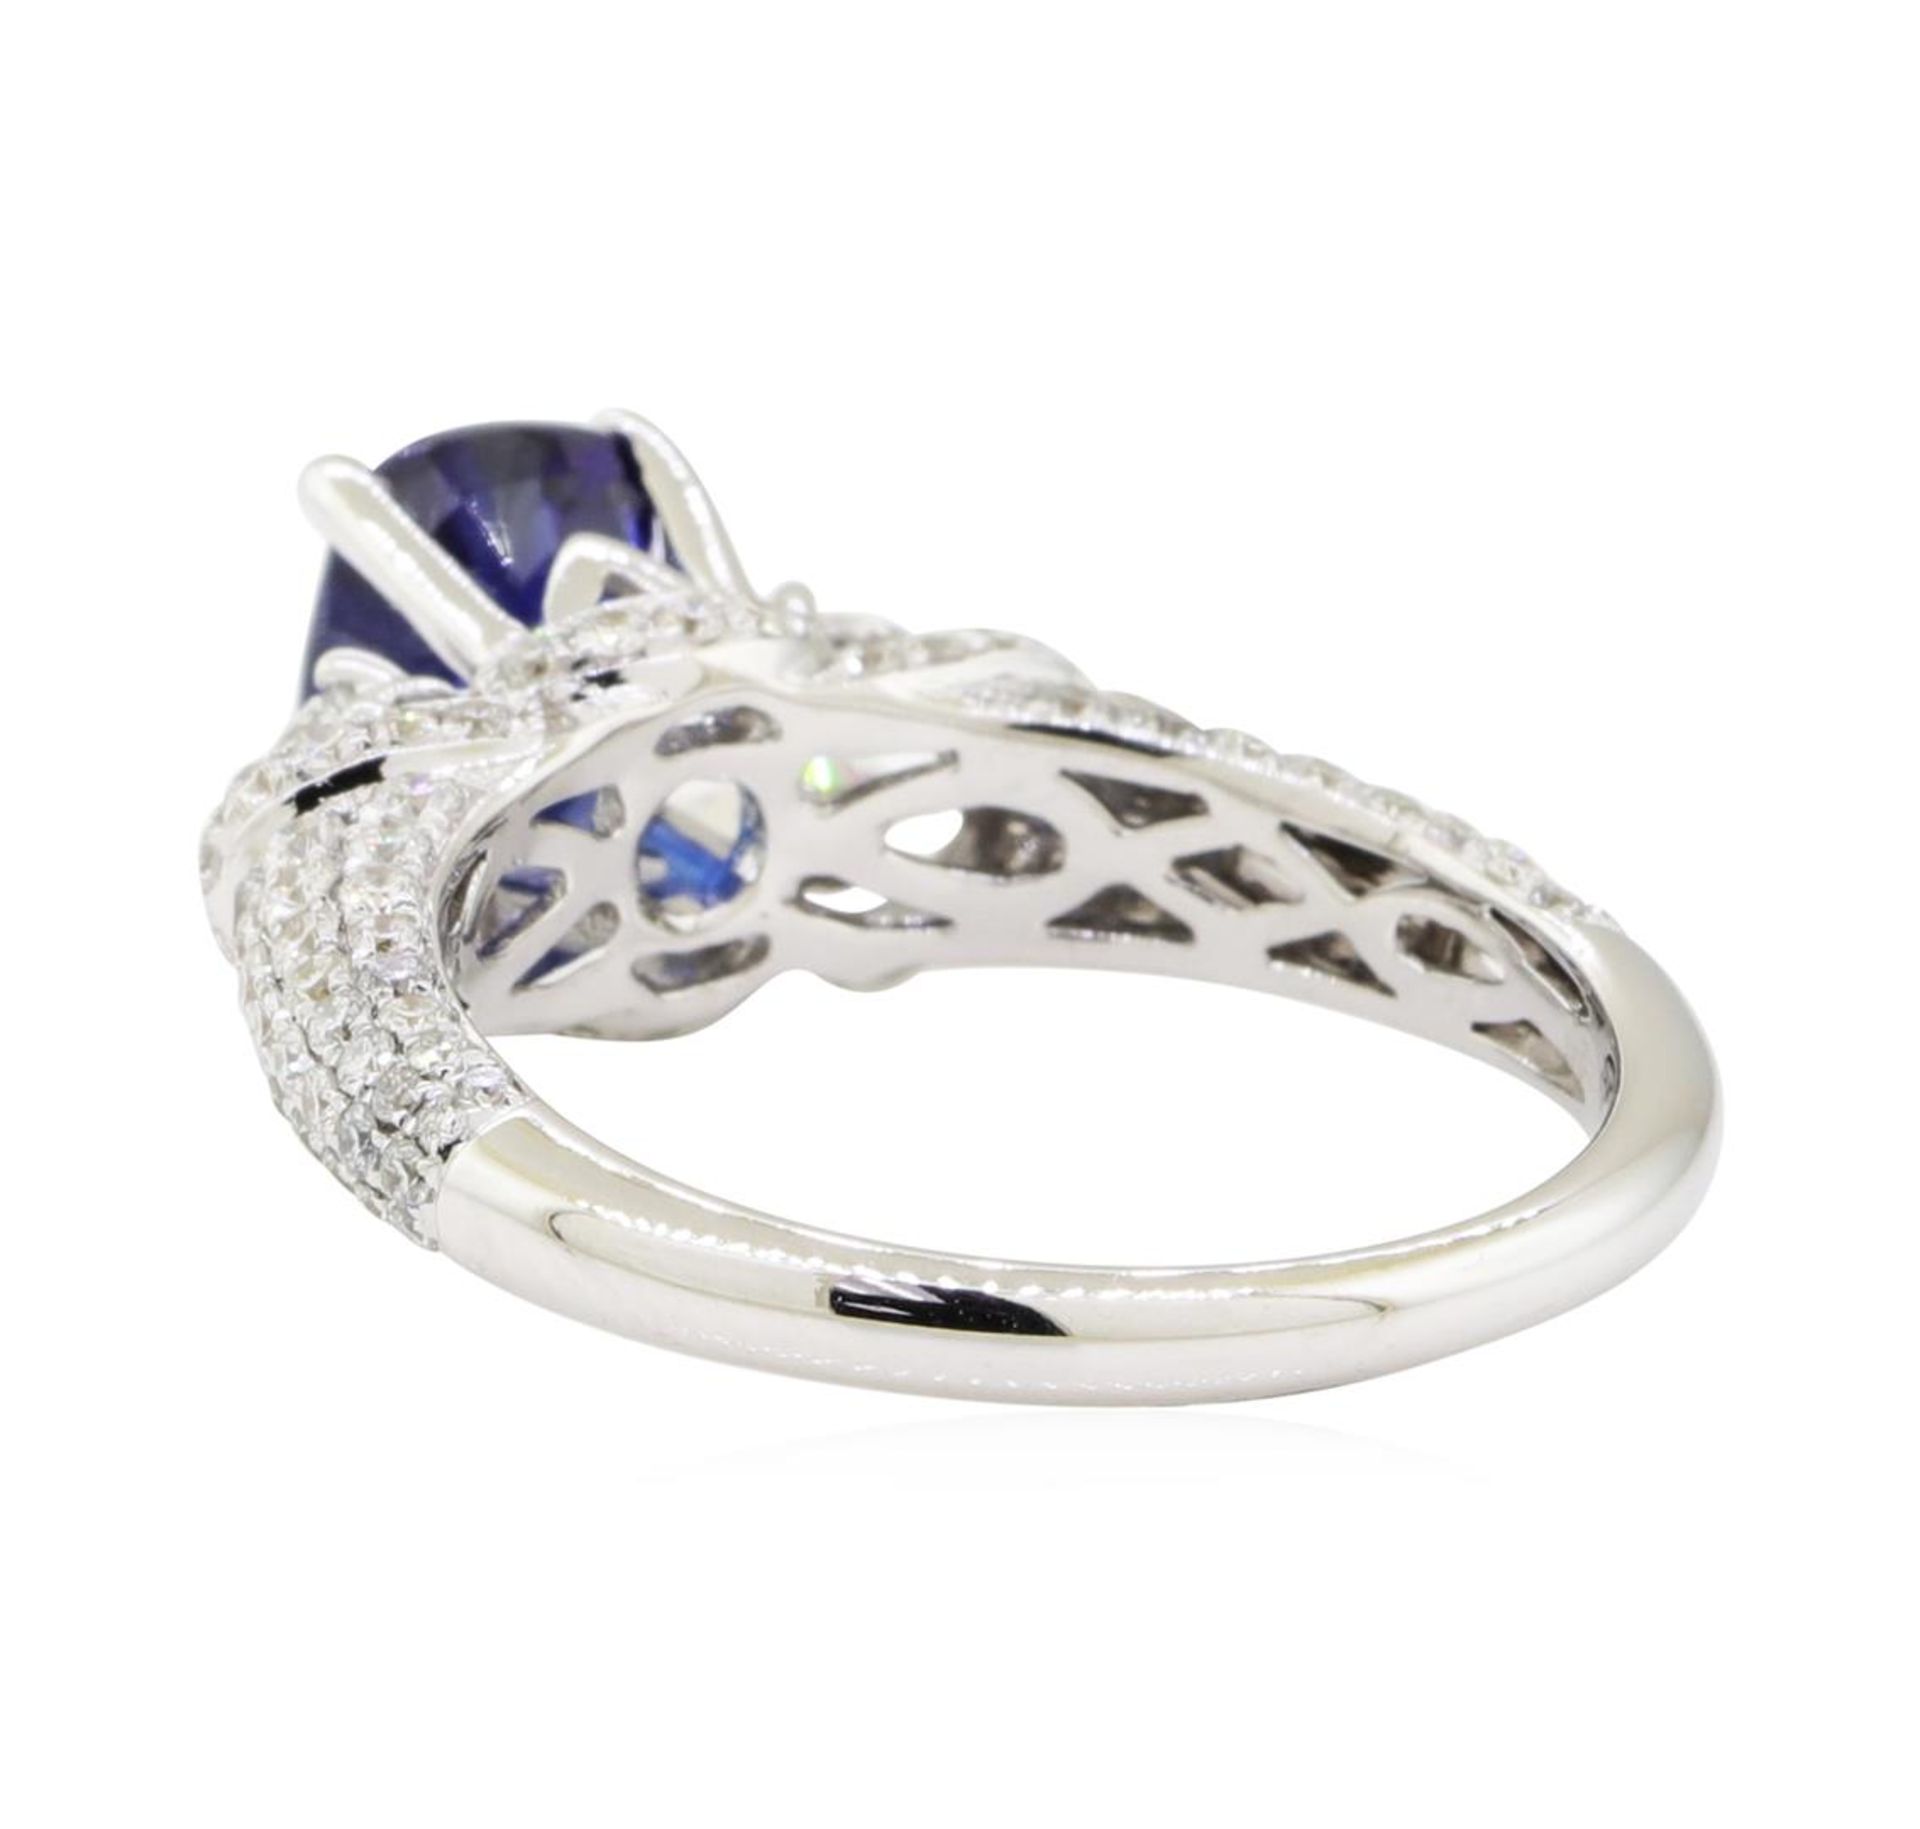 3.02 ctw Colored Stone and Diamond Ring - 18KT White Gold - Image 3 of 5